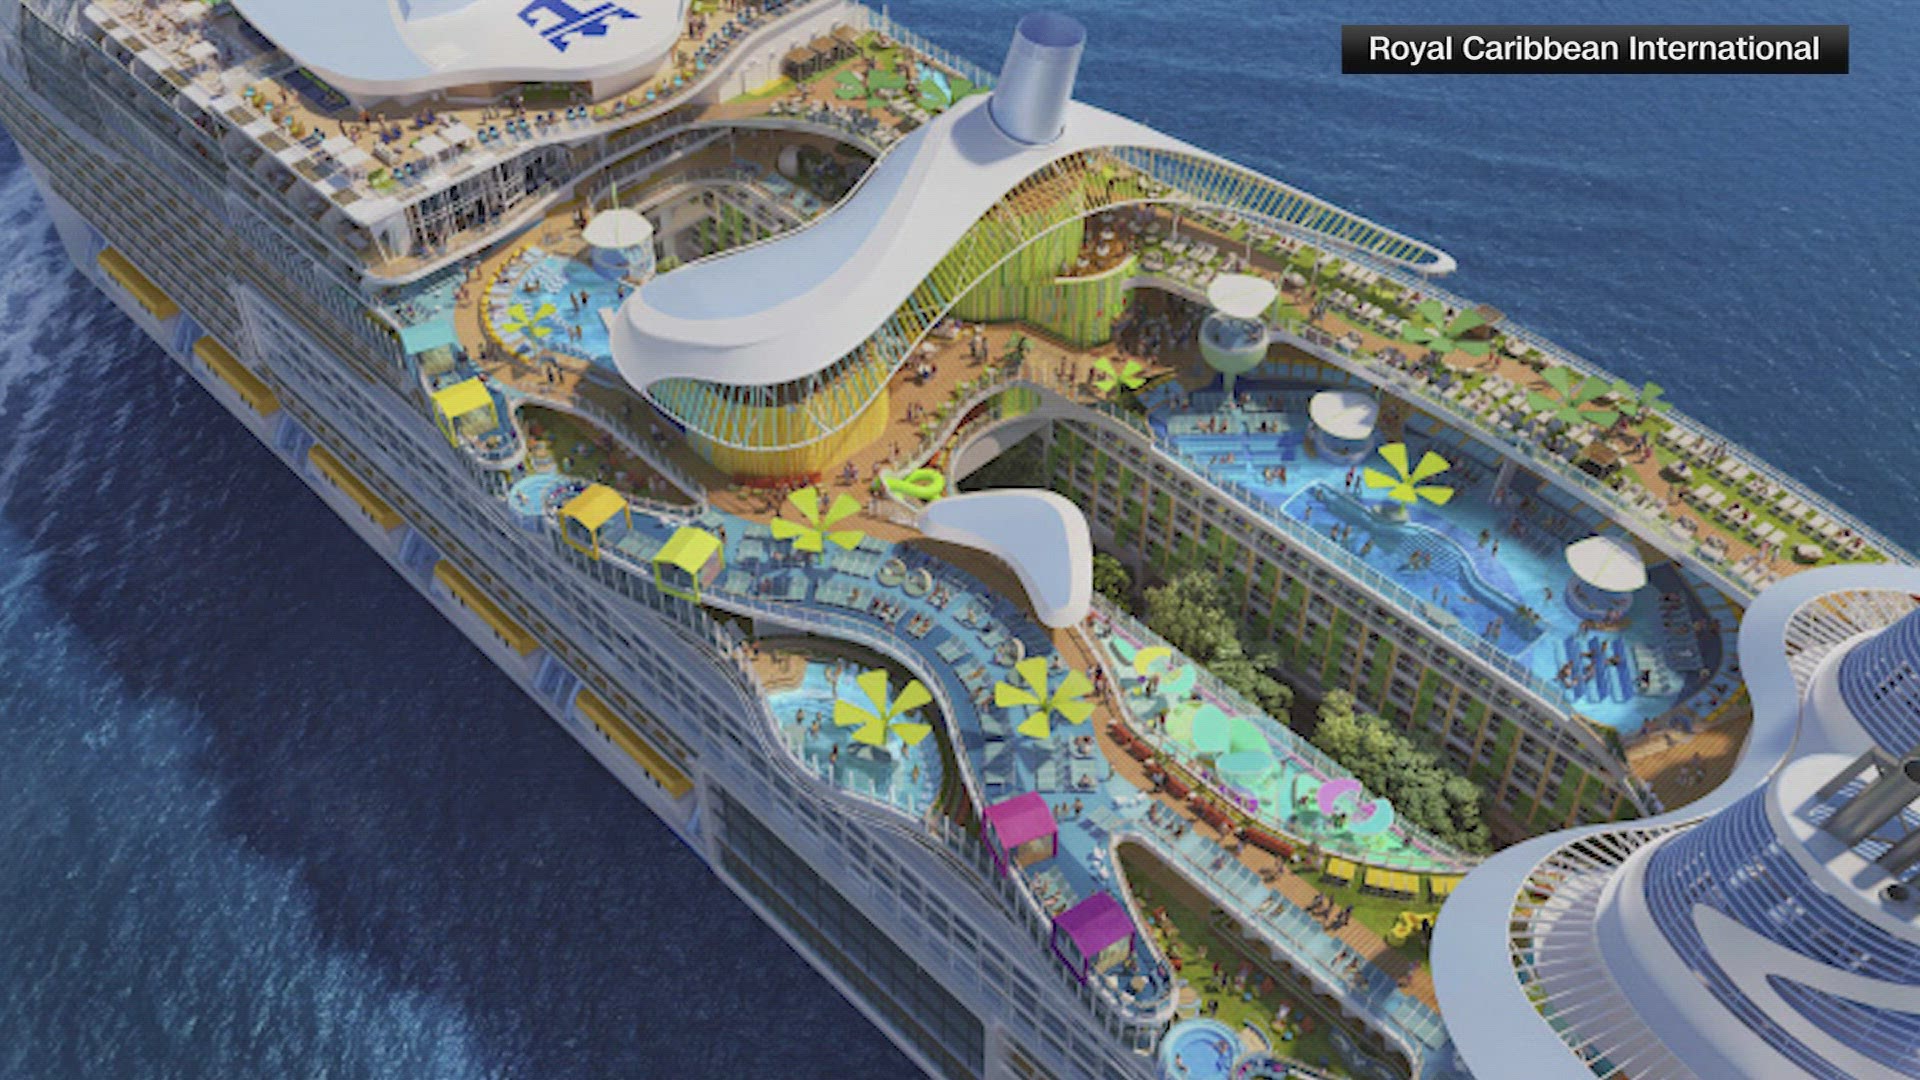 Royal Caribbean’s Icon of the Seas weighs around 250,000 tons and features a water park, more than 40 dining options, seven pools, and 20 decks.